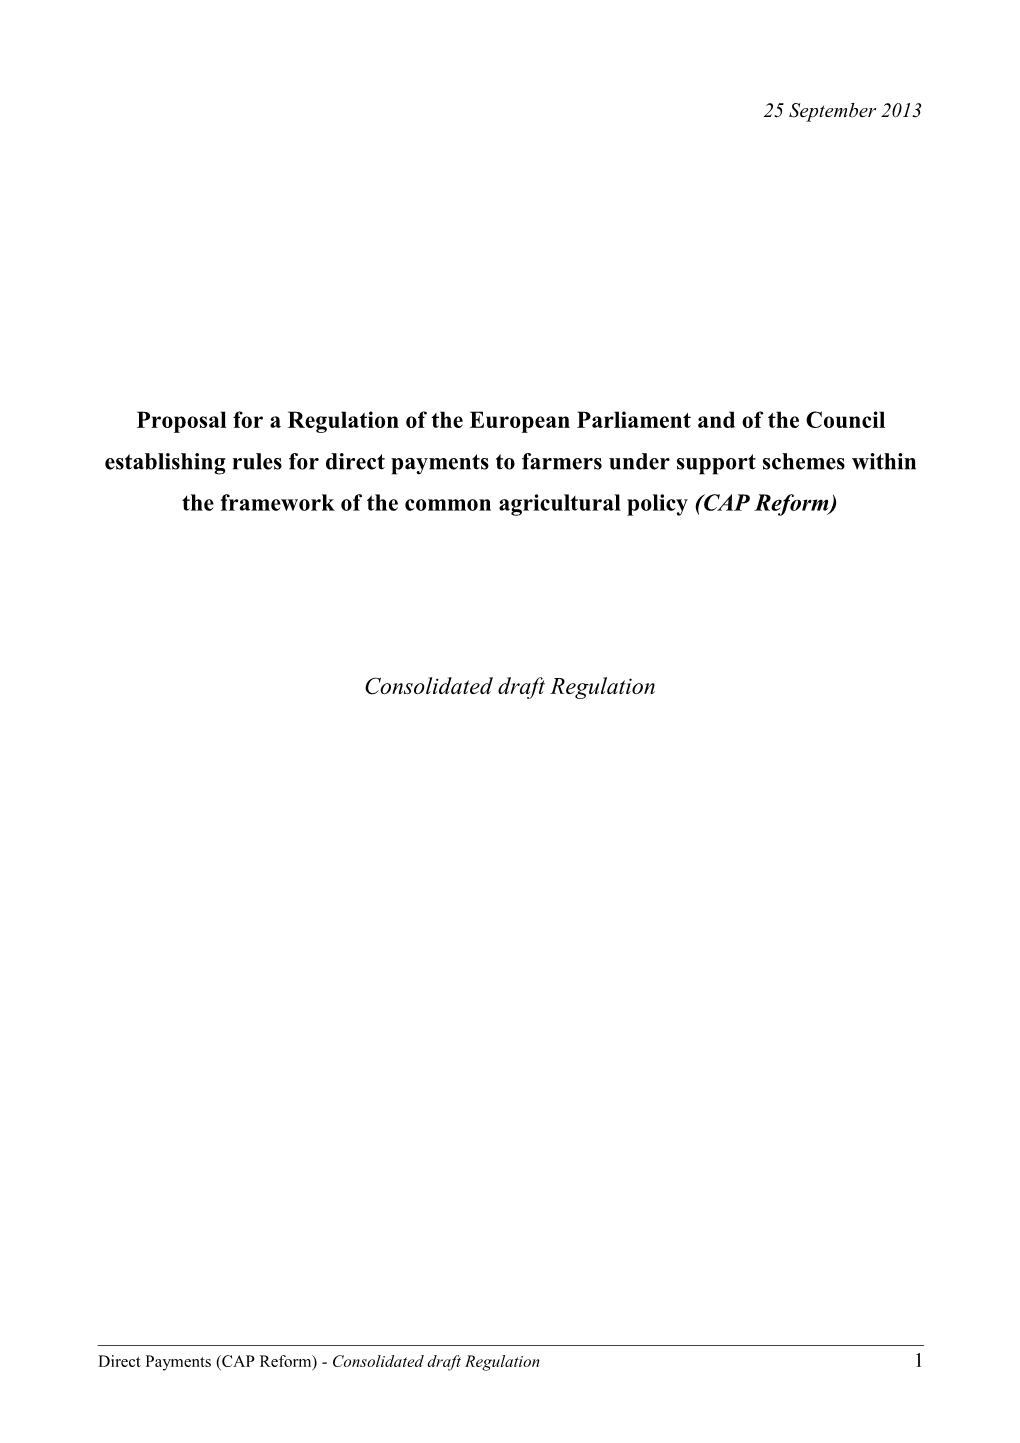 Draft Regulation of the European Parliament and of the Council